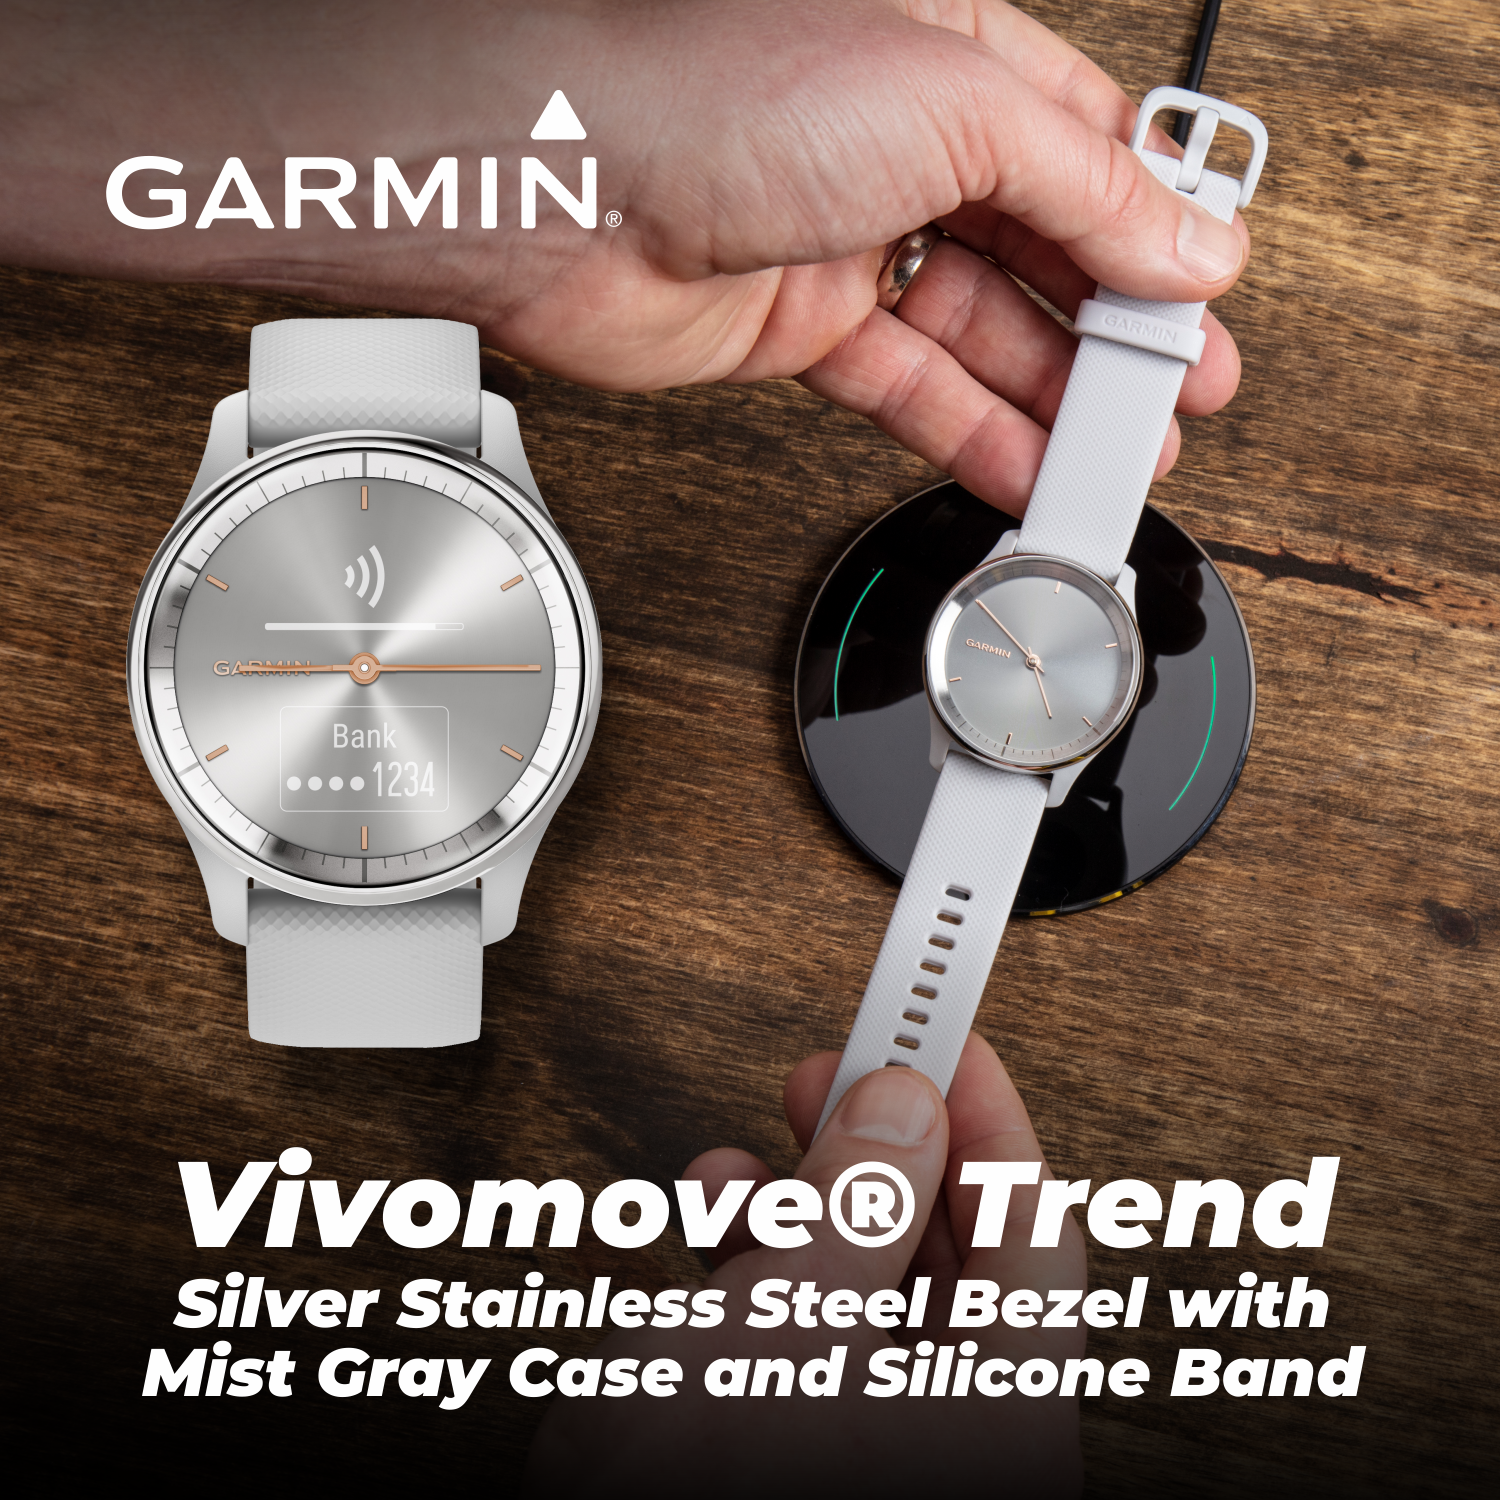 Garmin Vivomove Trend review: a stylish but flawed fitness watch